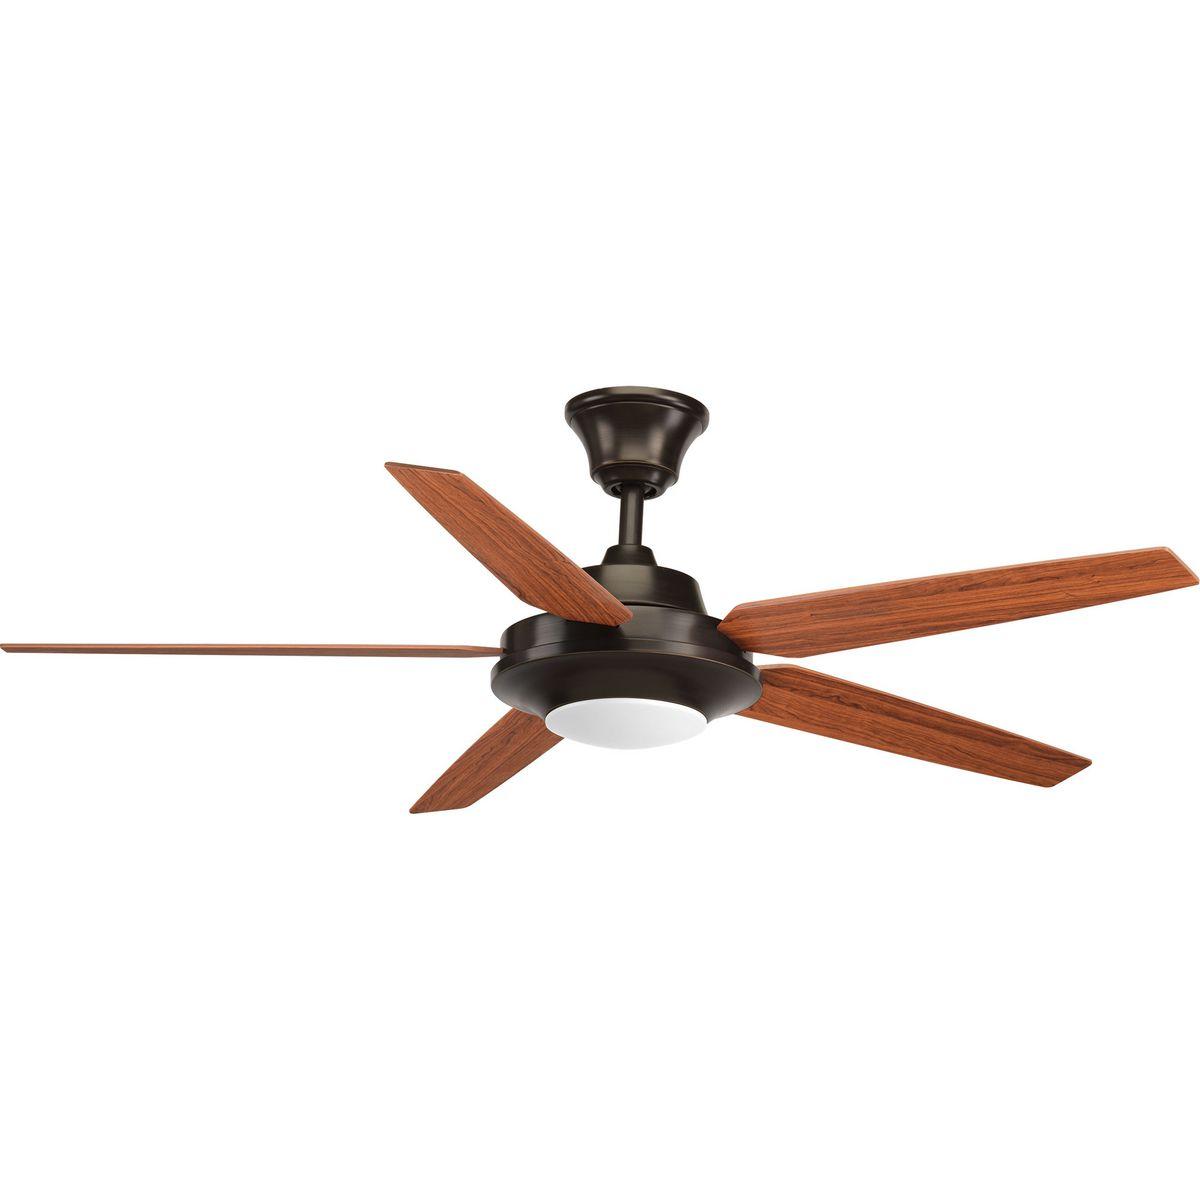 Hubbell P2539-2030K Five-blade 54 inch Signature Plus II ceiling fan with five reversible blades in classic walnut and medium cherry. The LED light source, offering both form and function with energy- and cost-savings benefits, contains a white opal shatterproof shade and is